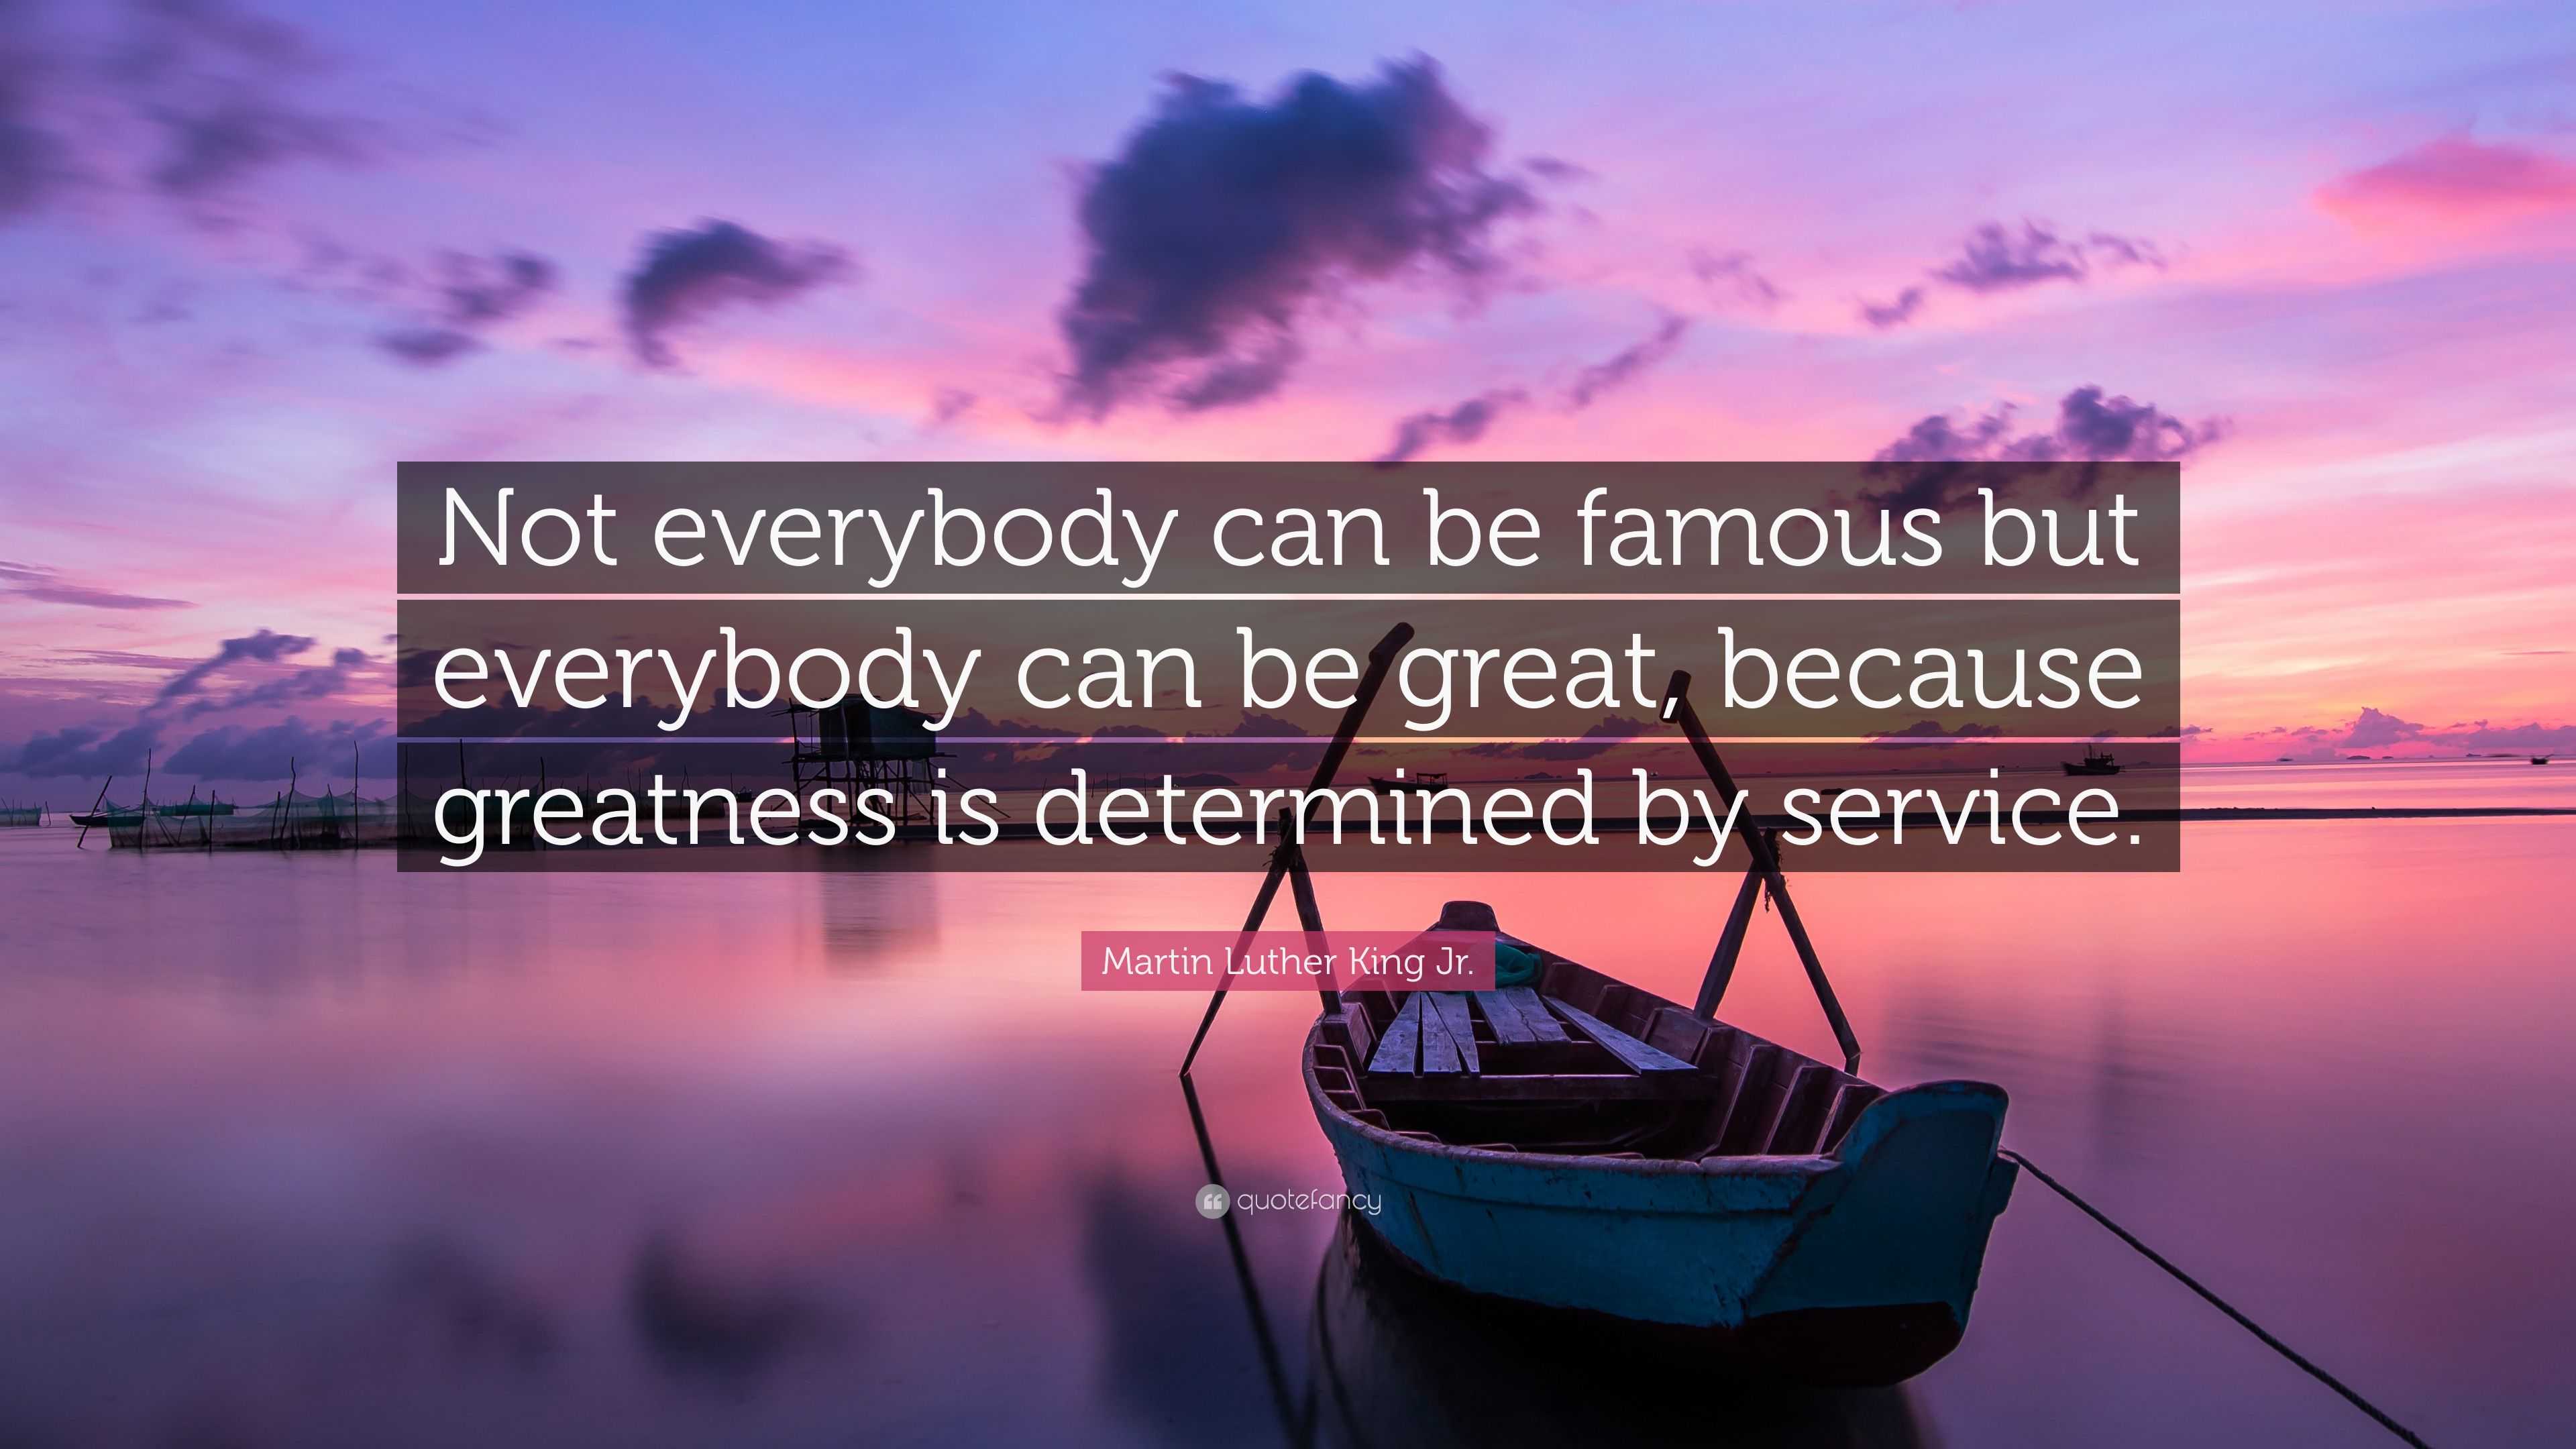 Martin Luther King Jr. Quote: “Not everybody can be famous but